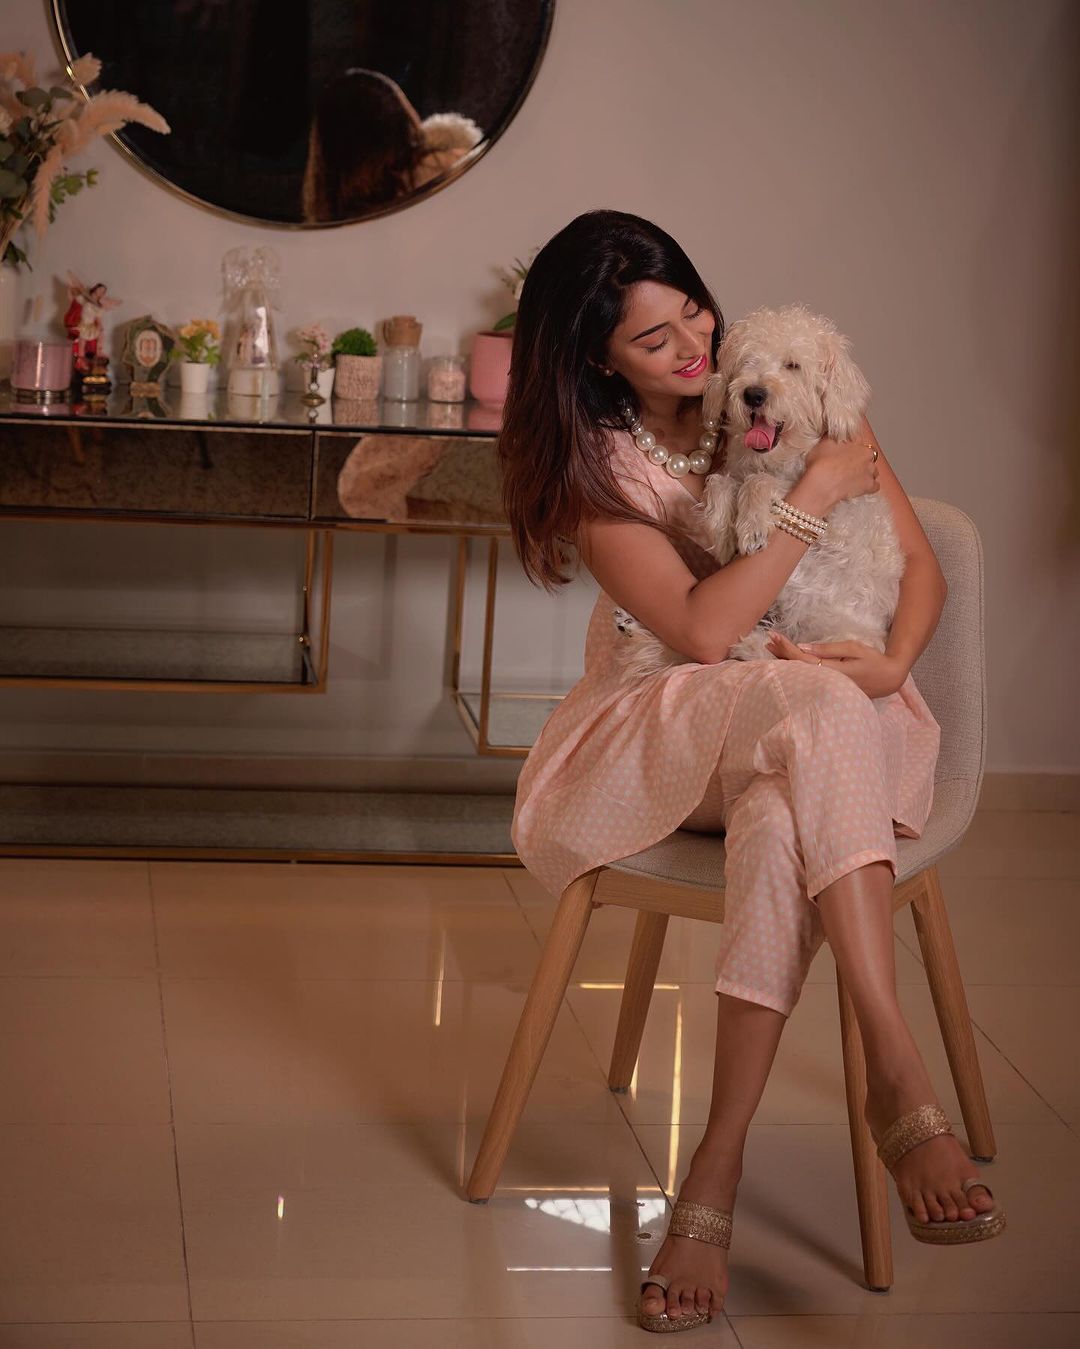 Actress Erica Fernandes Shared Hearty Happy Children’s Day Wishes To Fans With Her Cute Puppers